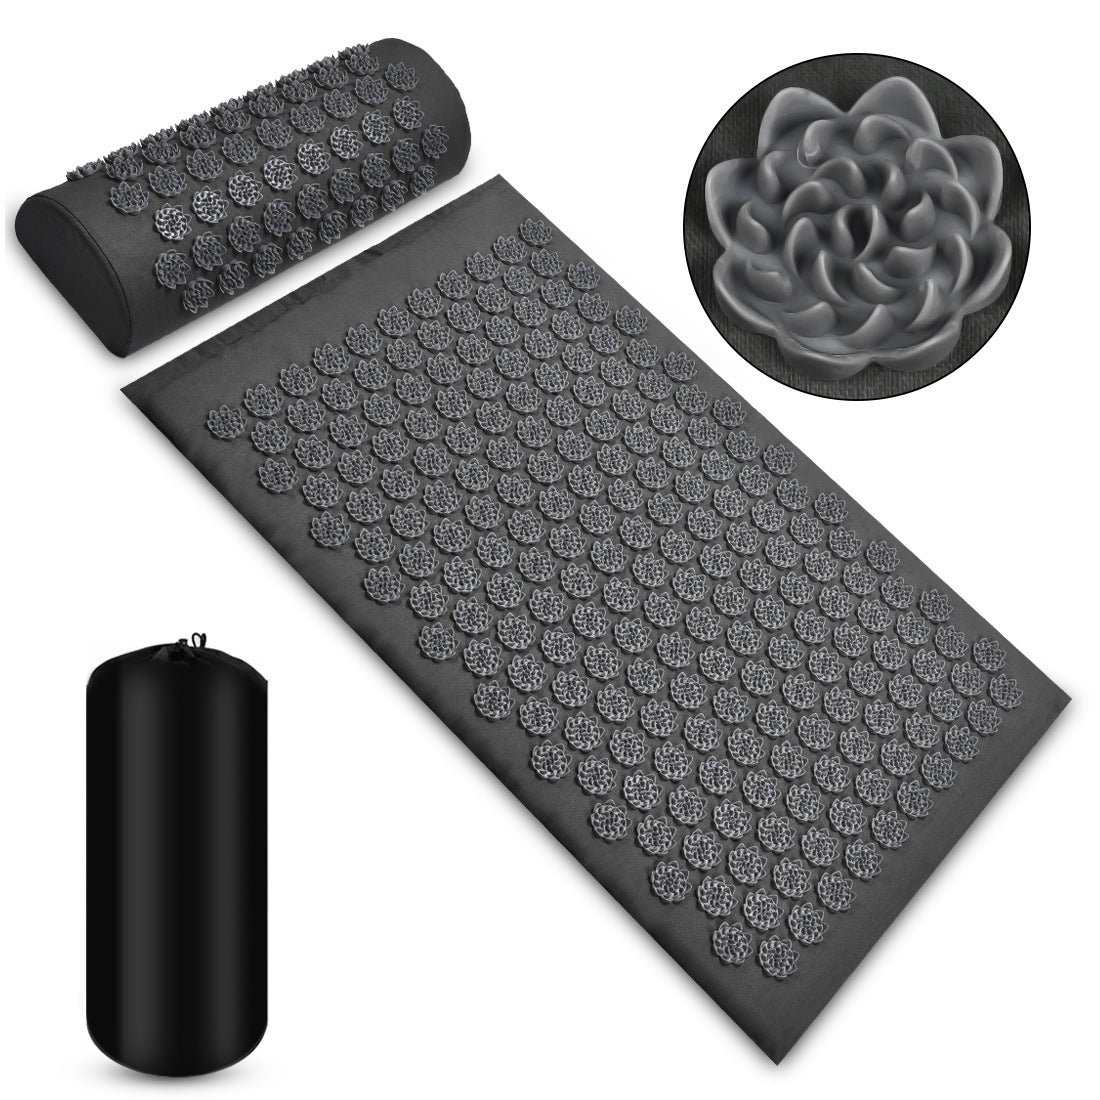 Grey Acupressure Mat with gentle grey lotus, set comes with body mat, neck pillow, carrying bag - pain gates theory, pain relief, acupressure - home • office • health